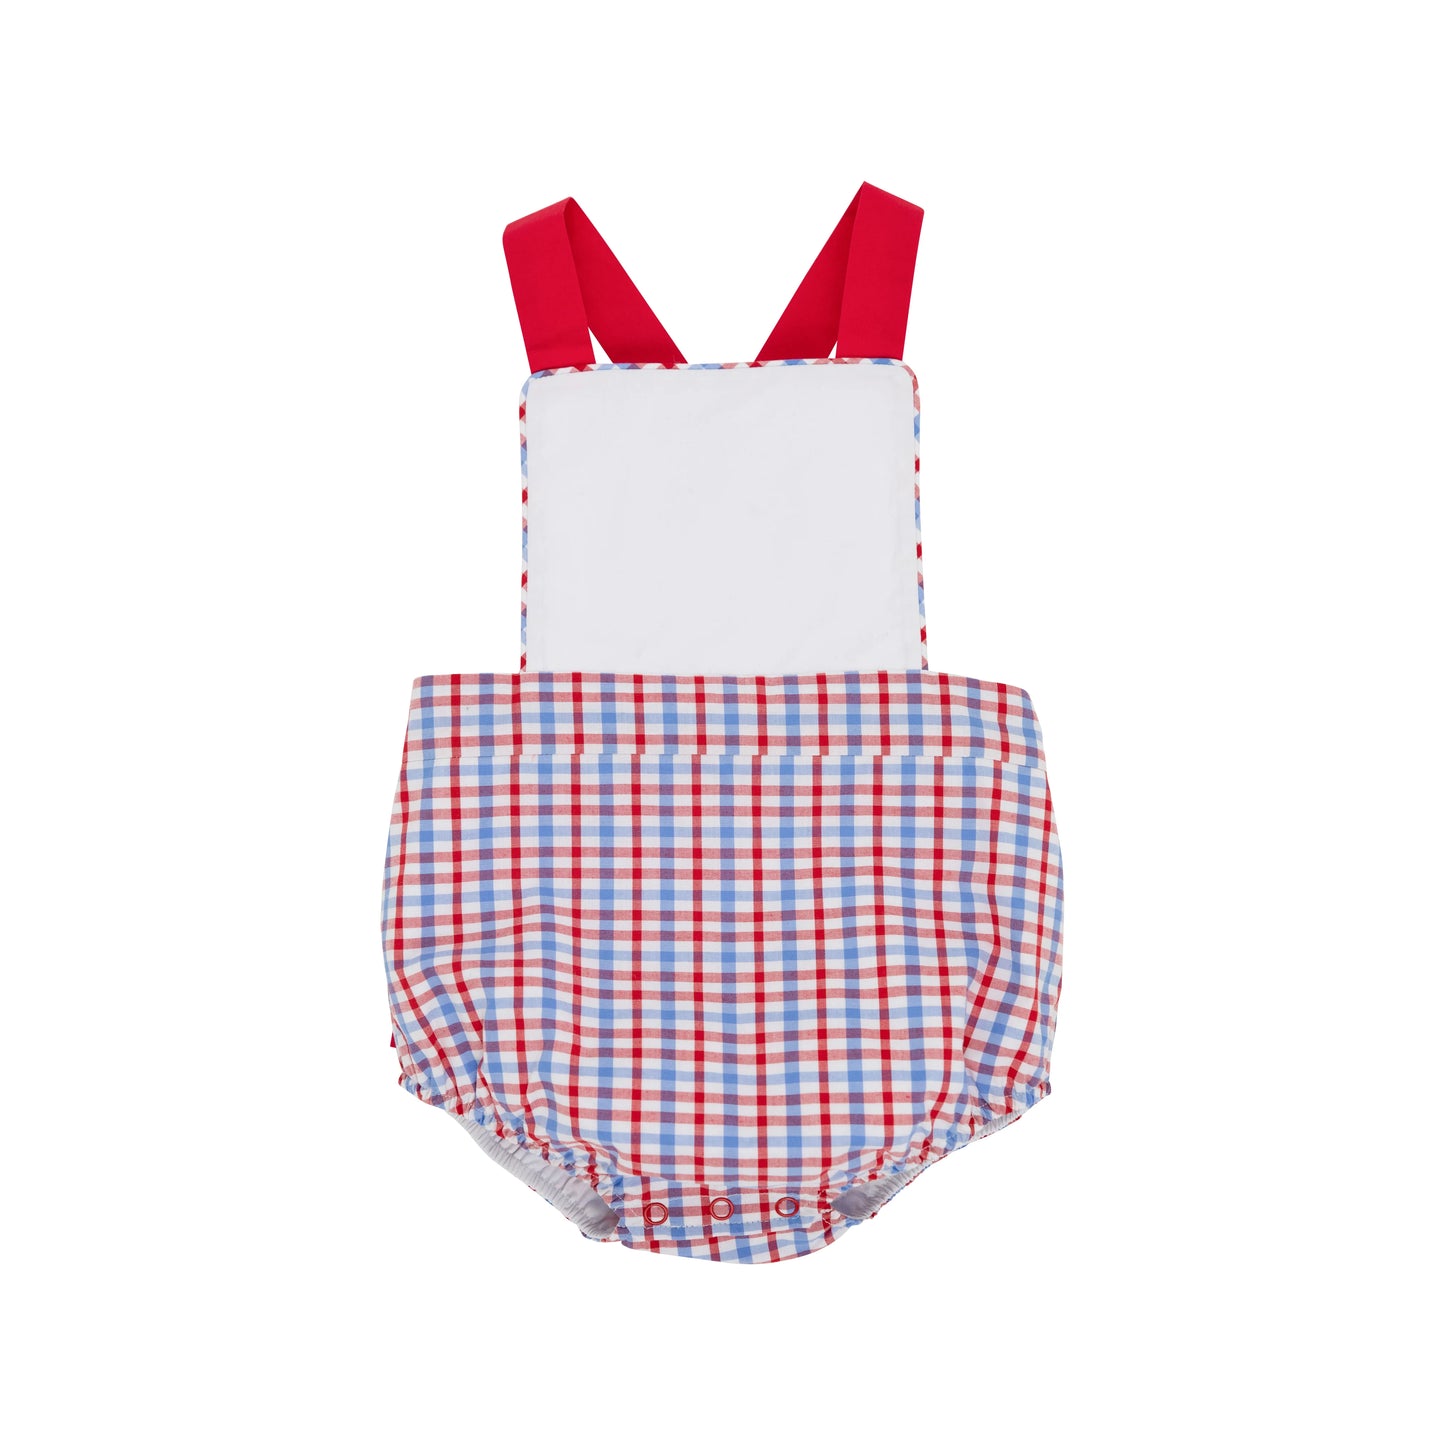 SAYRE SUNSUIT - PROVINCETOWN PLAID W/ RICHMOND RED AND WHITE